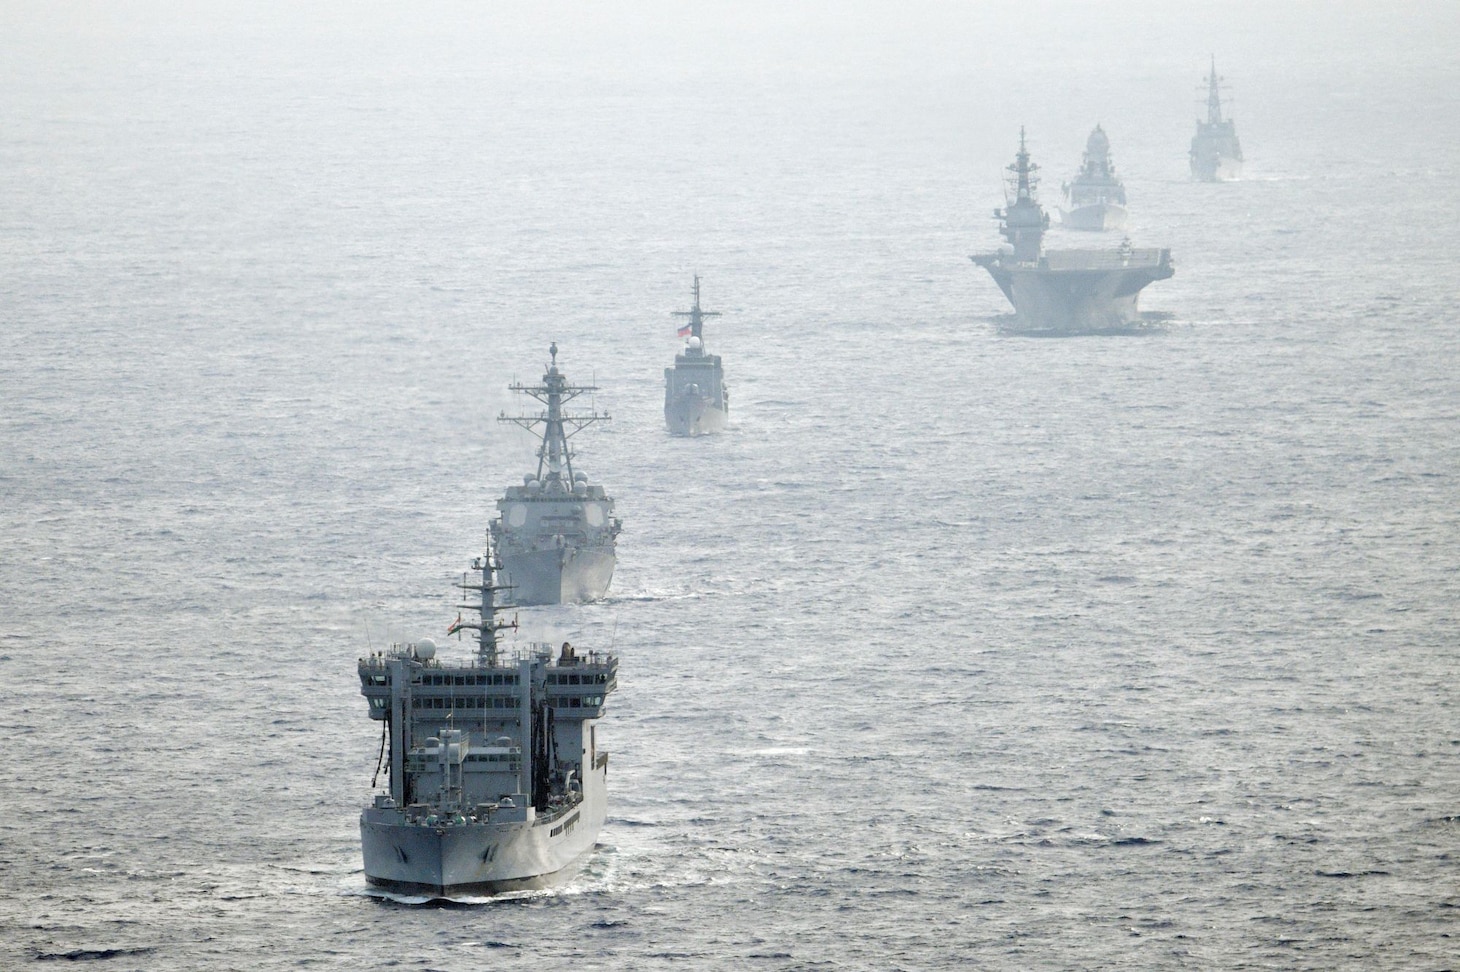 Navy guided-missile destroyer USS William P. Lawrence (DDG 110), transits through international waters with the Indian Navy destroyer INS Kolkata (D 63) and tanker INS Shakti (A 57), Japan Maritime Self-Defense Force helicopter-carrier JS Izumo (DDH 183) and destroyer JS Murasame (DD 101), and Republic of Philippine Navy patrol ship BRP Andres Bonifacio (PS 17) through the South China Sea.